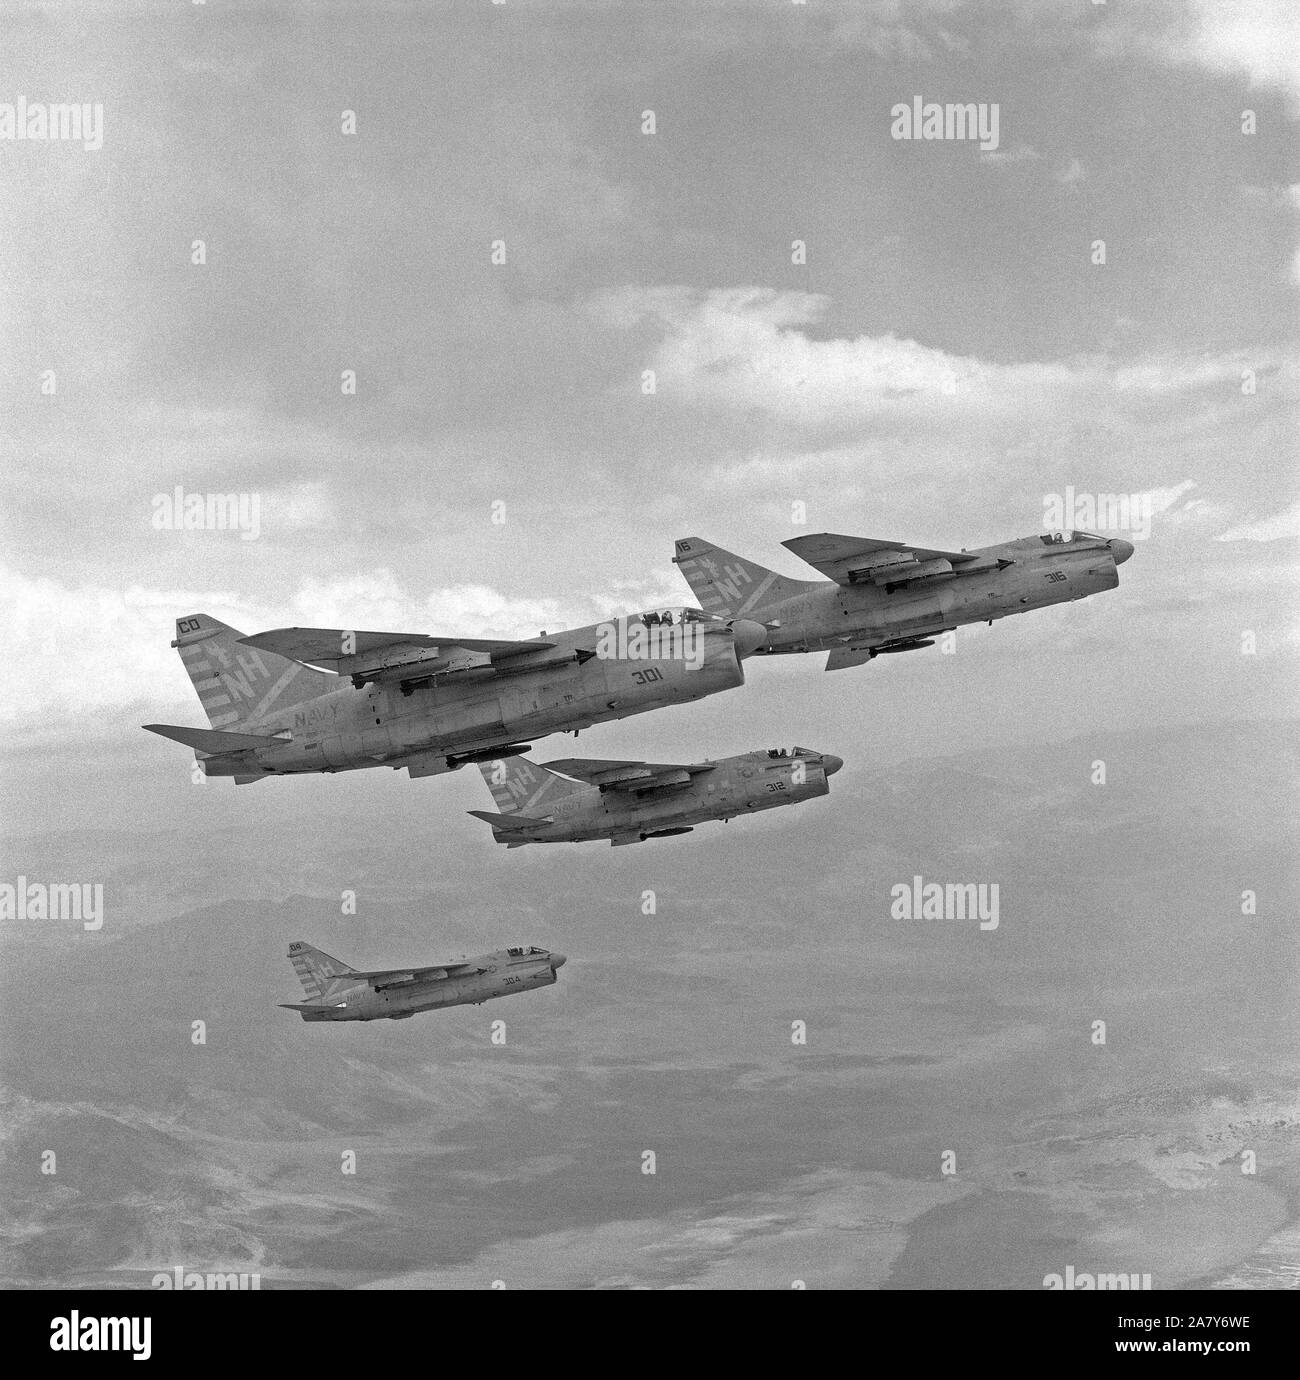 An air-to-air right side view of three A-7E Corsair II aircraft of Attack Squadron 22 (VA-22) carrying AIM-9 Sidewinder missiles and Mark 82 500-pound bombs.  The aircraft are en route to a target range at Naval Weapons Center, China Lake. Stock Photo